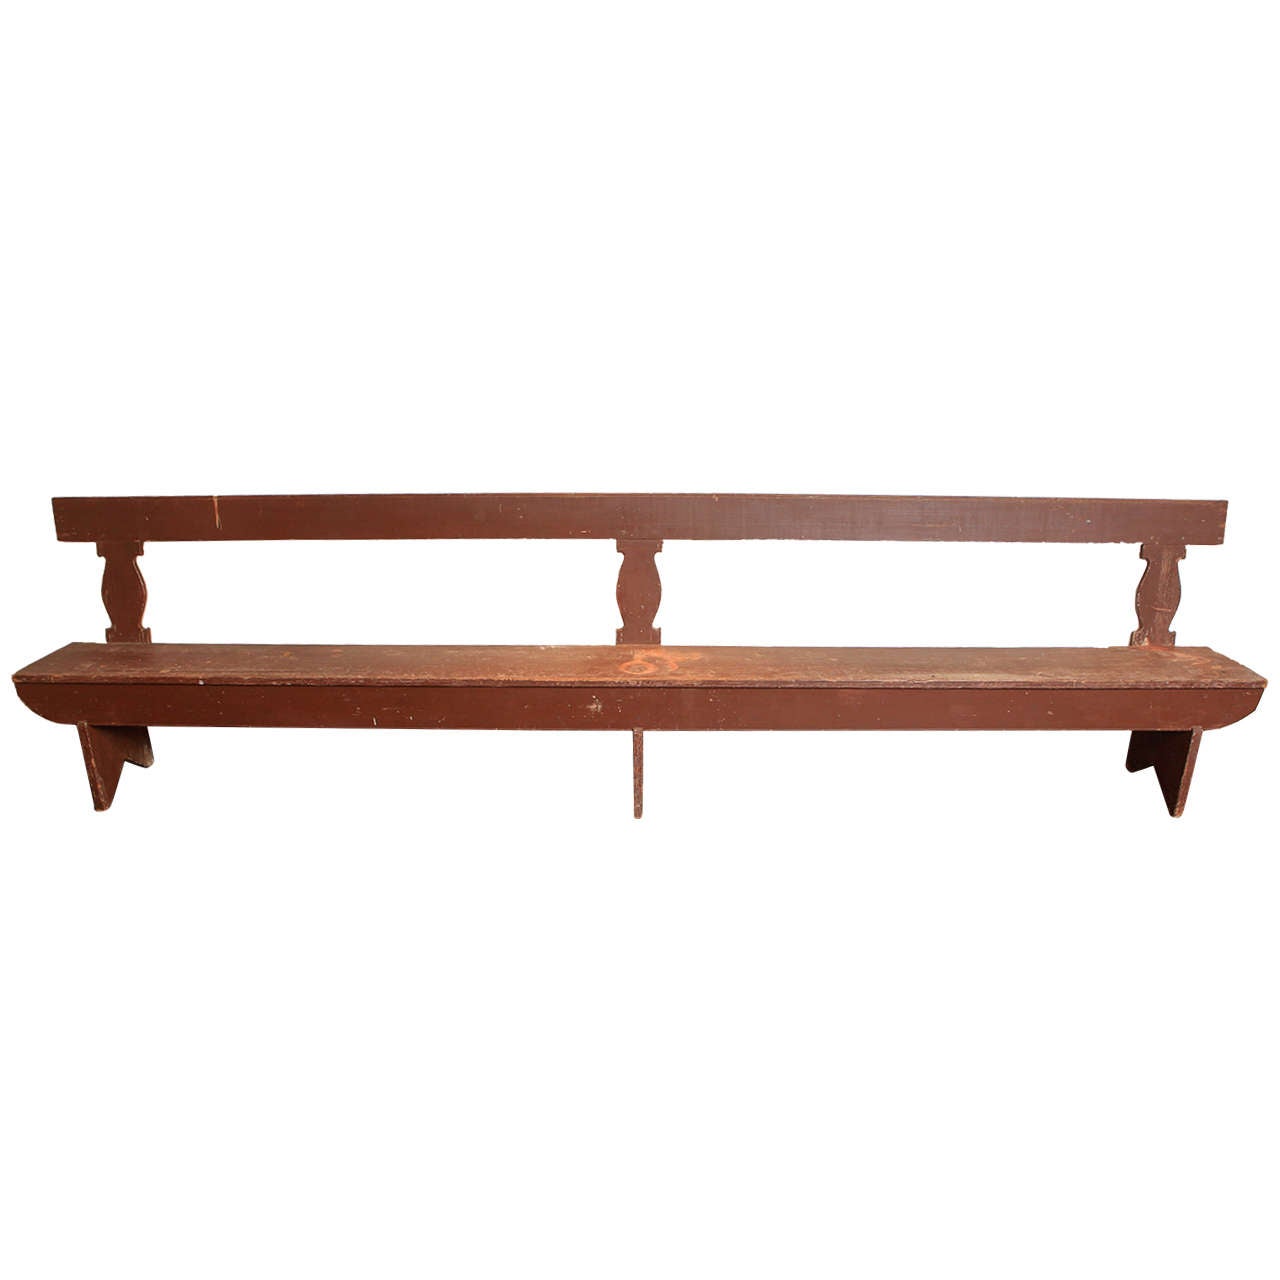 19th Century Federal Painted Bench